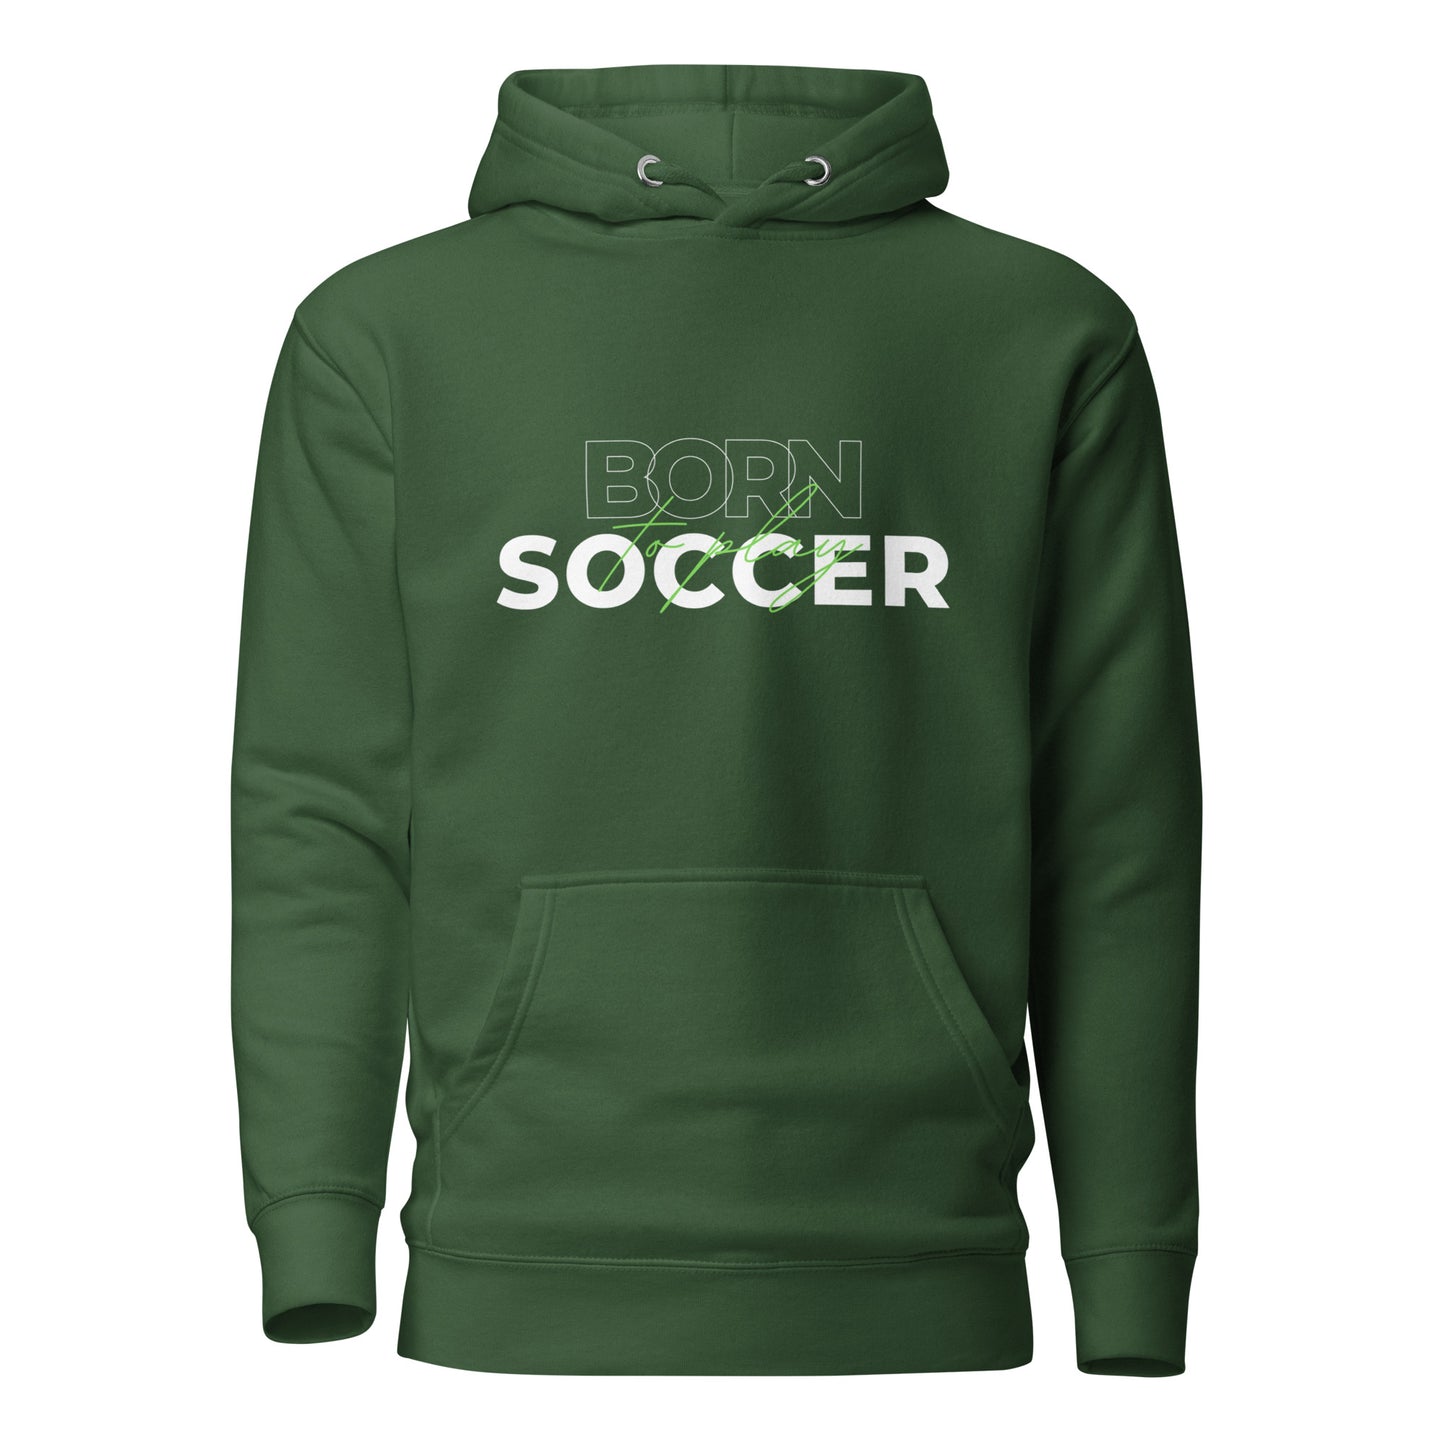 Born to Play Soccer Hoodie